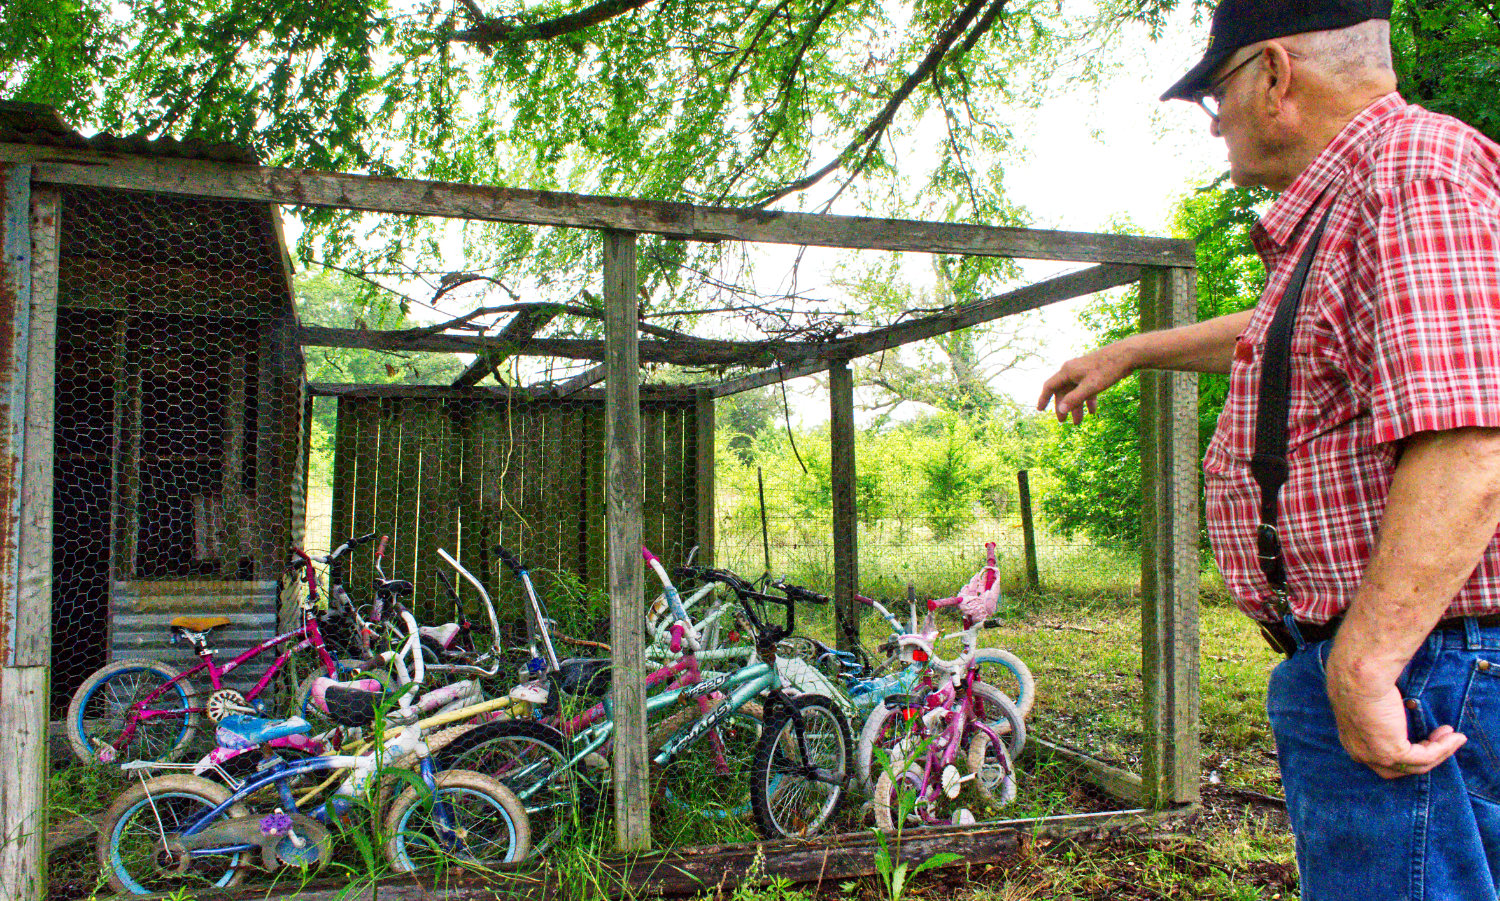 Robert Pierce looks over some of the bicycles he needs to clean and repair for children to enjoy.